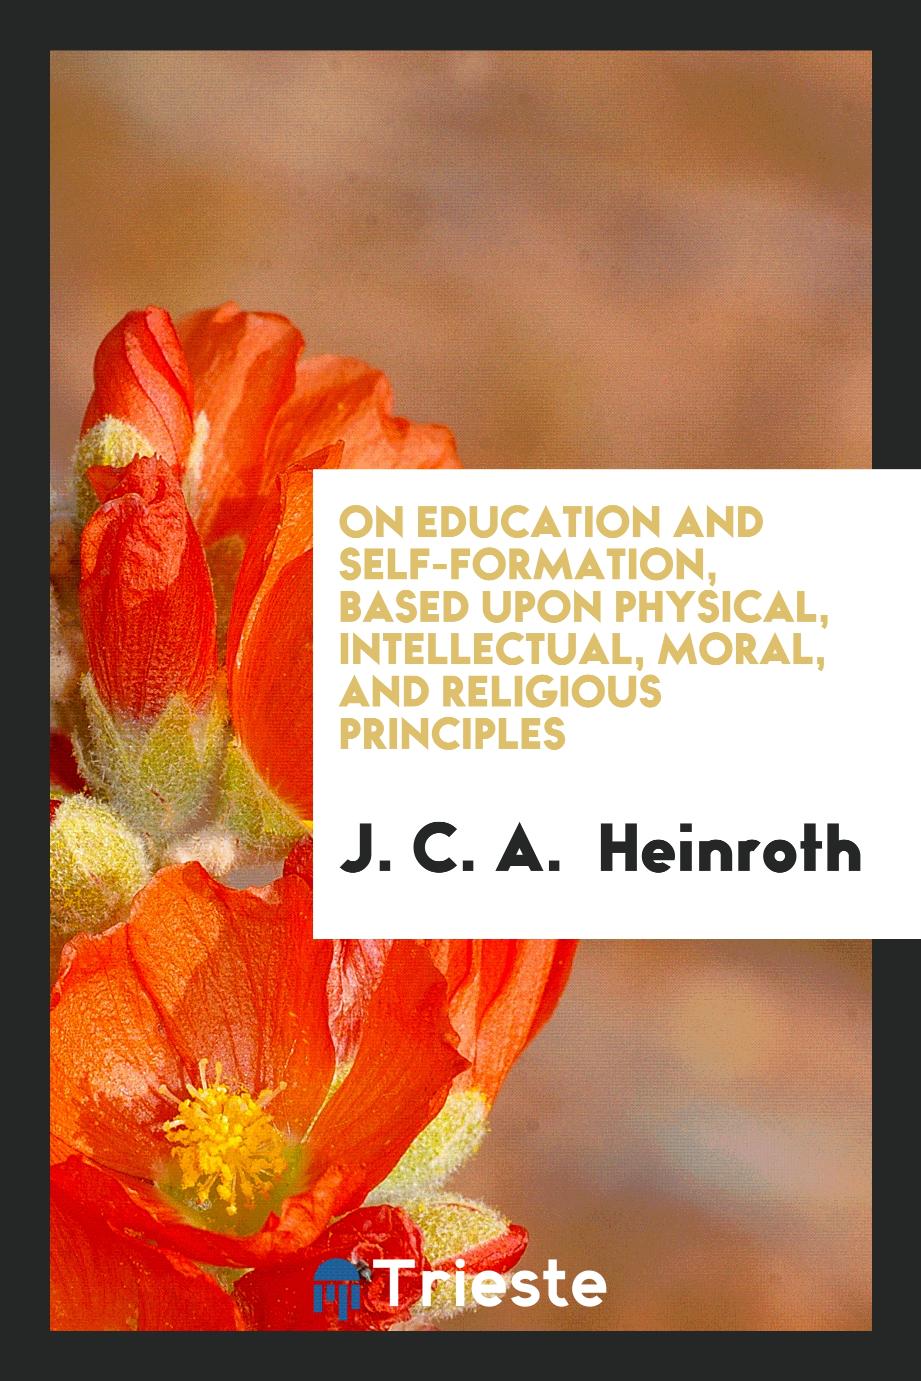 On Education and Self-Formation, Based upon Physical, Intellectual, Moral, and Religious Principles